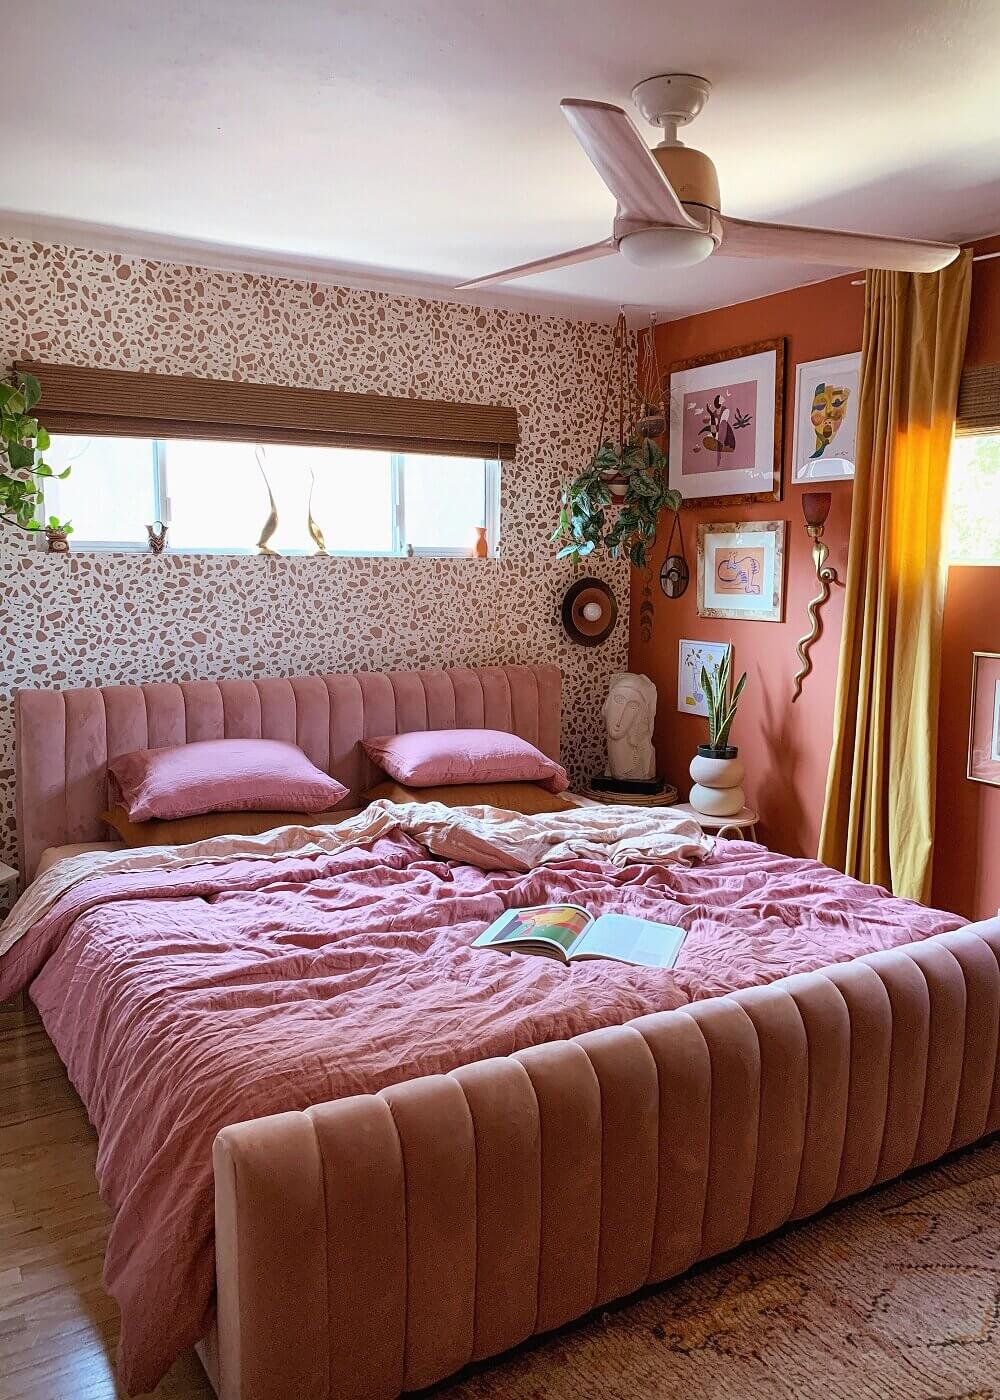 How To Style A Pink Bedroom For Adults   The Nordroom